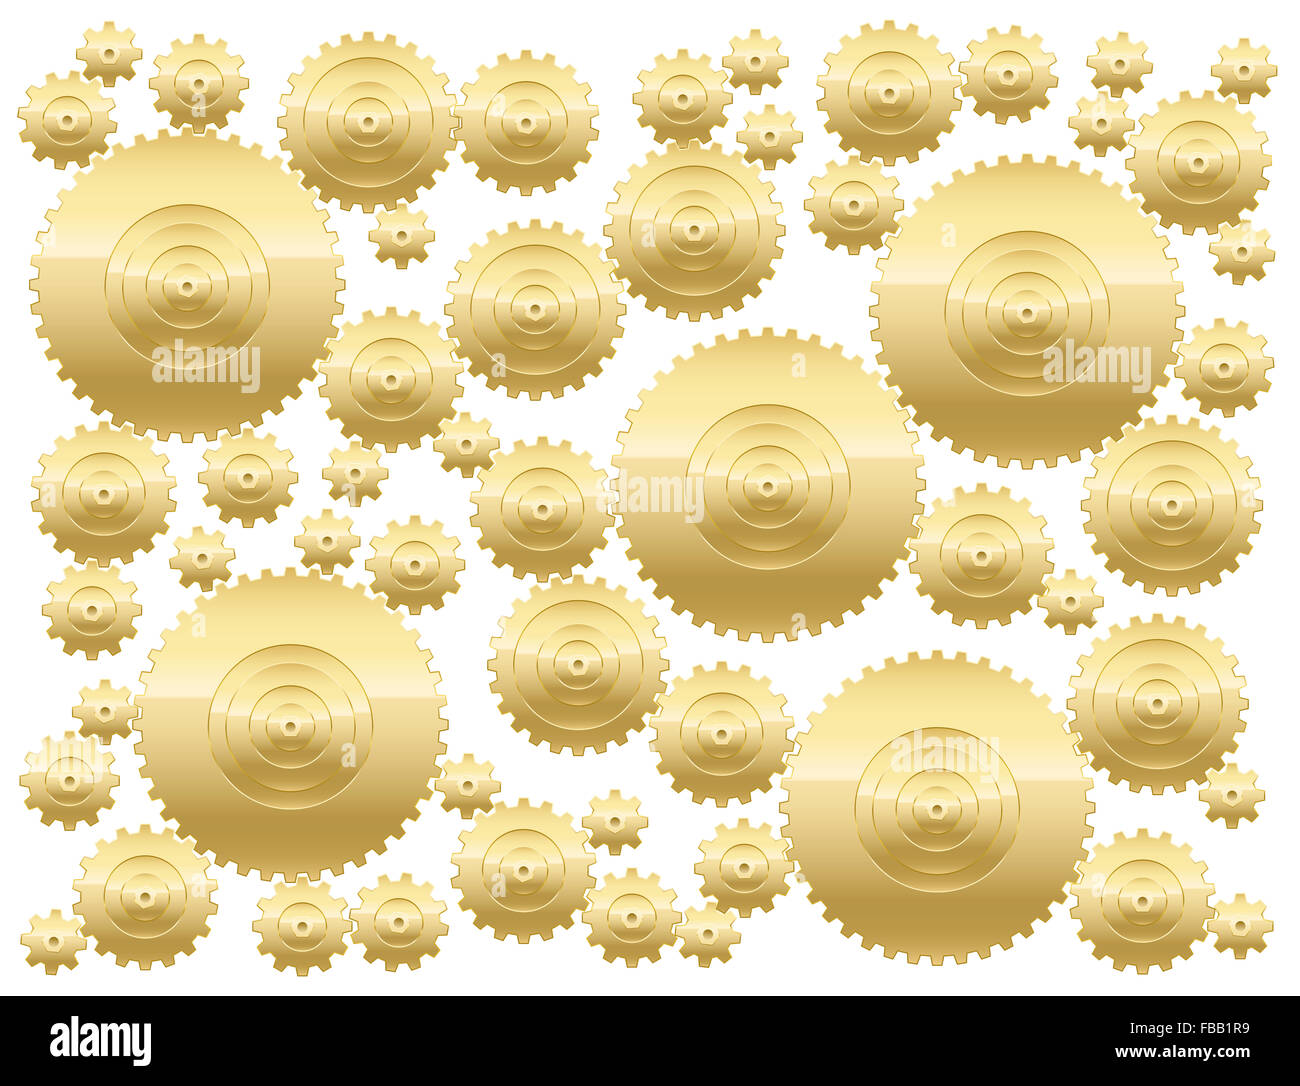 Cogs - golden gear wheels - illustration on white background. Stock Photo